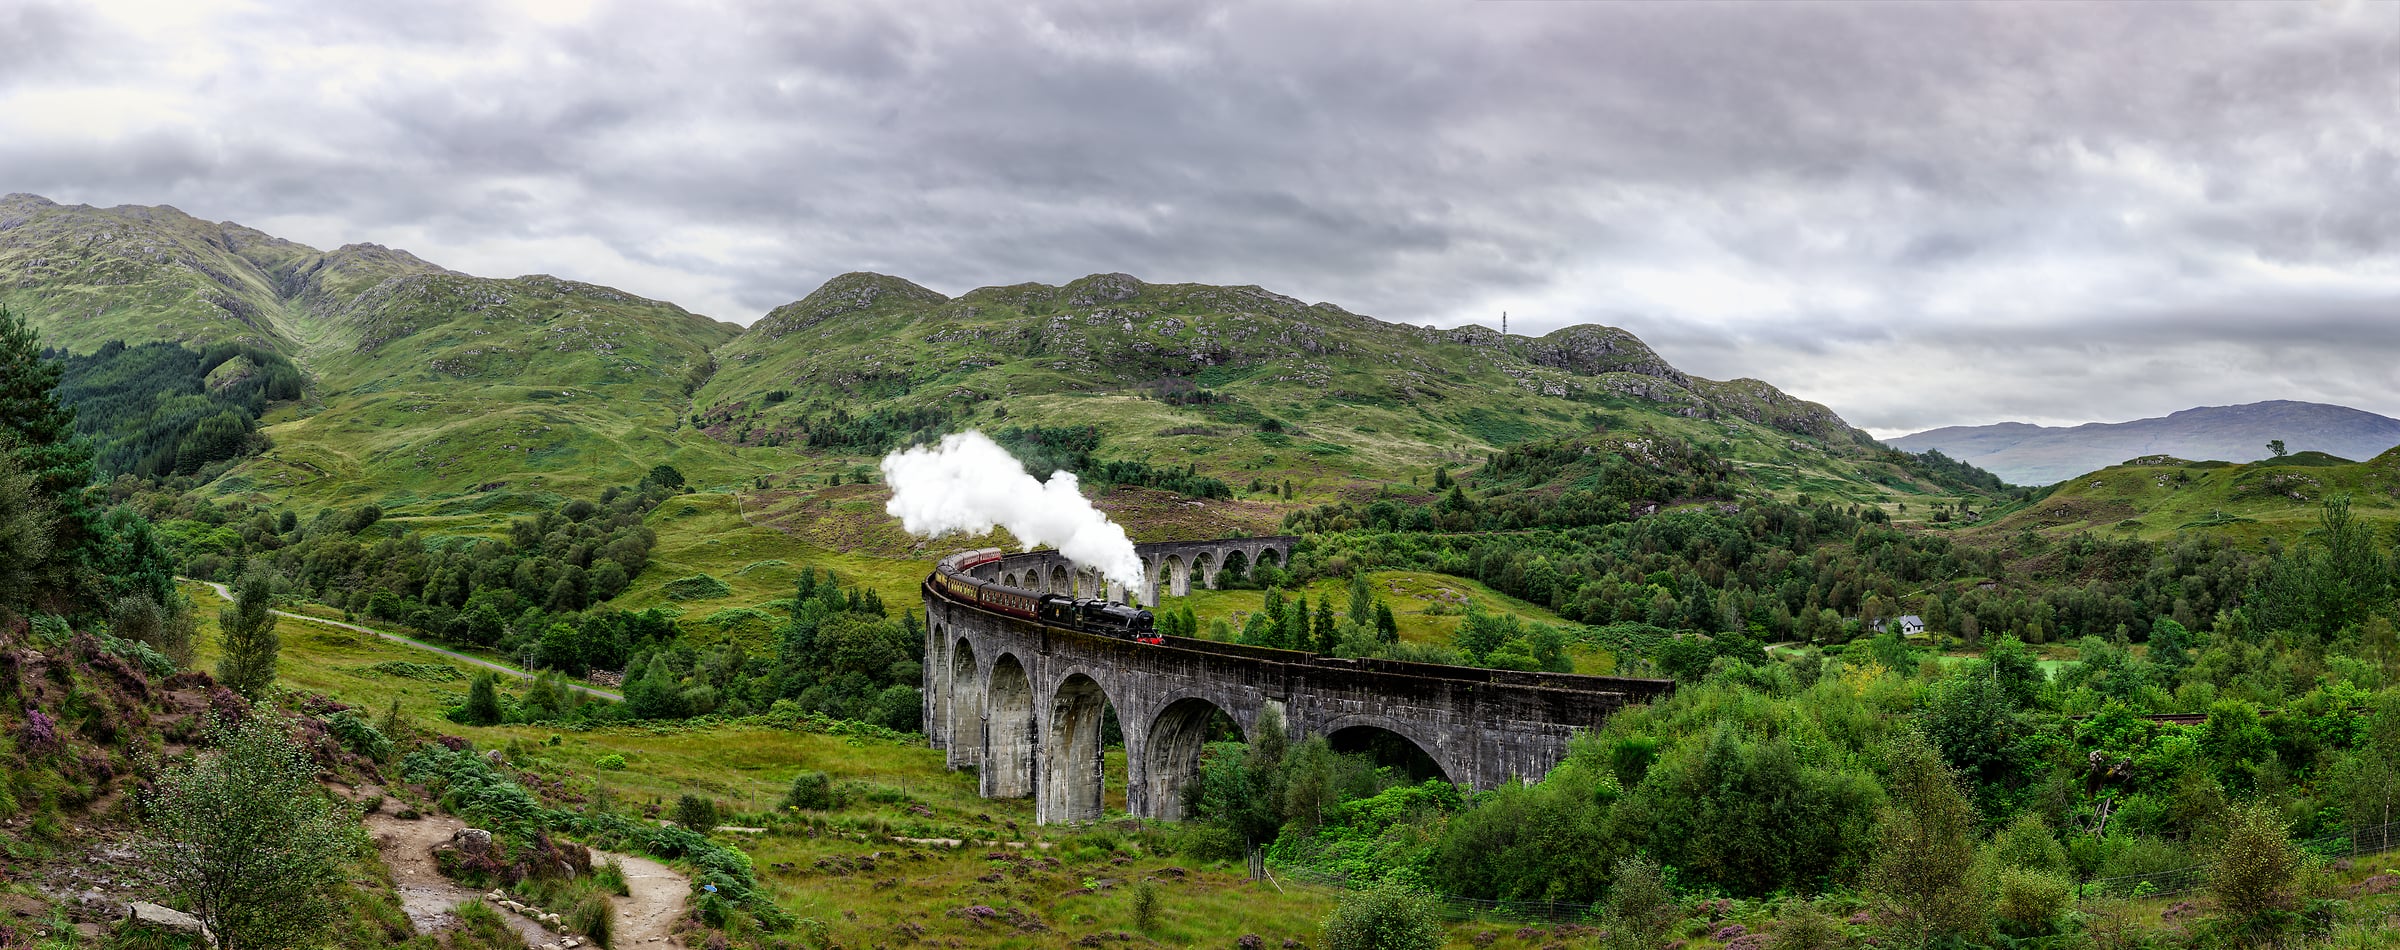 2,691 megapixels! A very high resolution, large-format VAST photo print of the Jacobite railroad train steam locomotive going across the Glenfinnan Viaduct bridge; landscape wall mural photograph created by Scott Dimond in Glenfinnan Viaduct, United Kingdom.